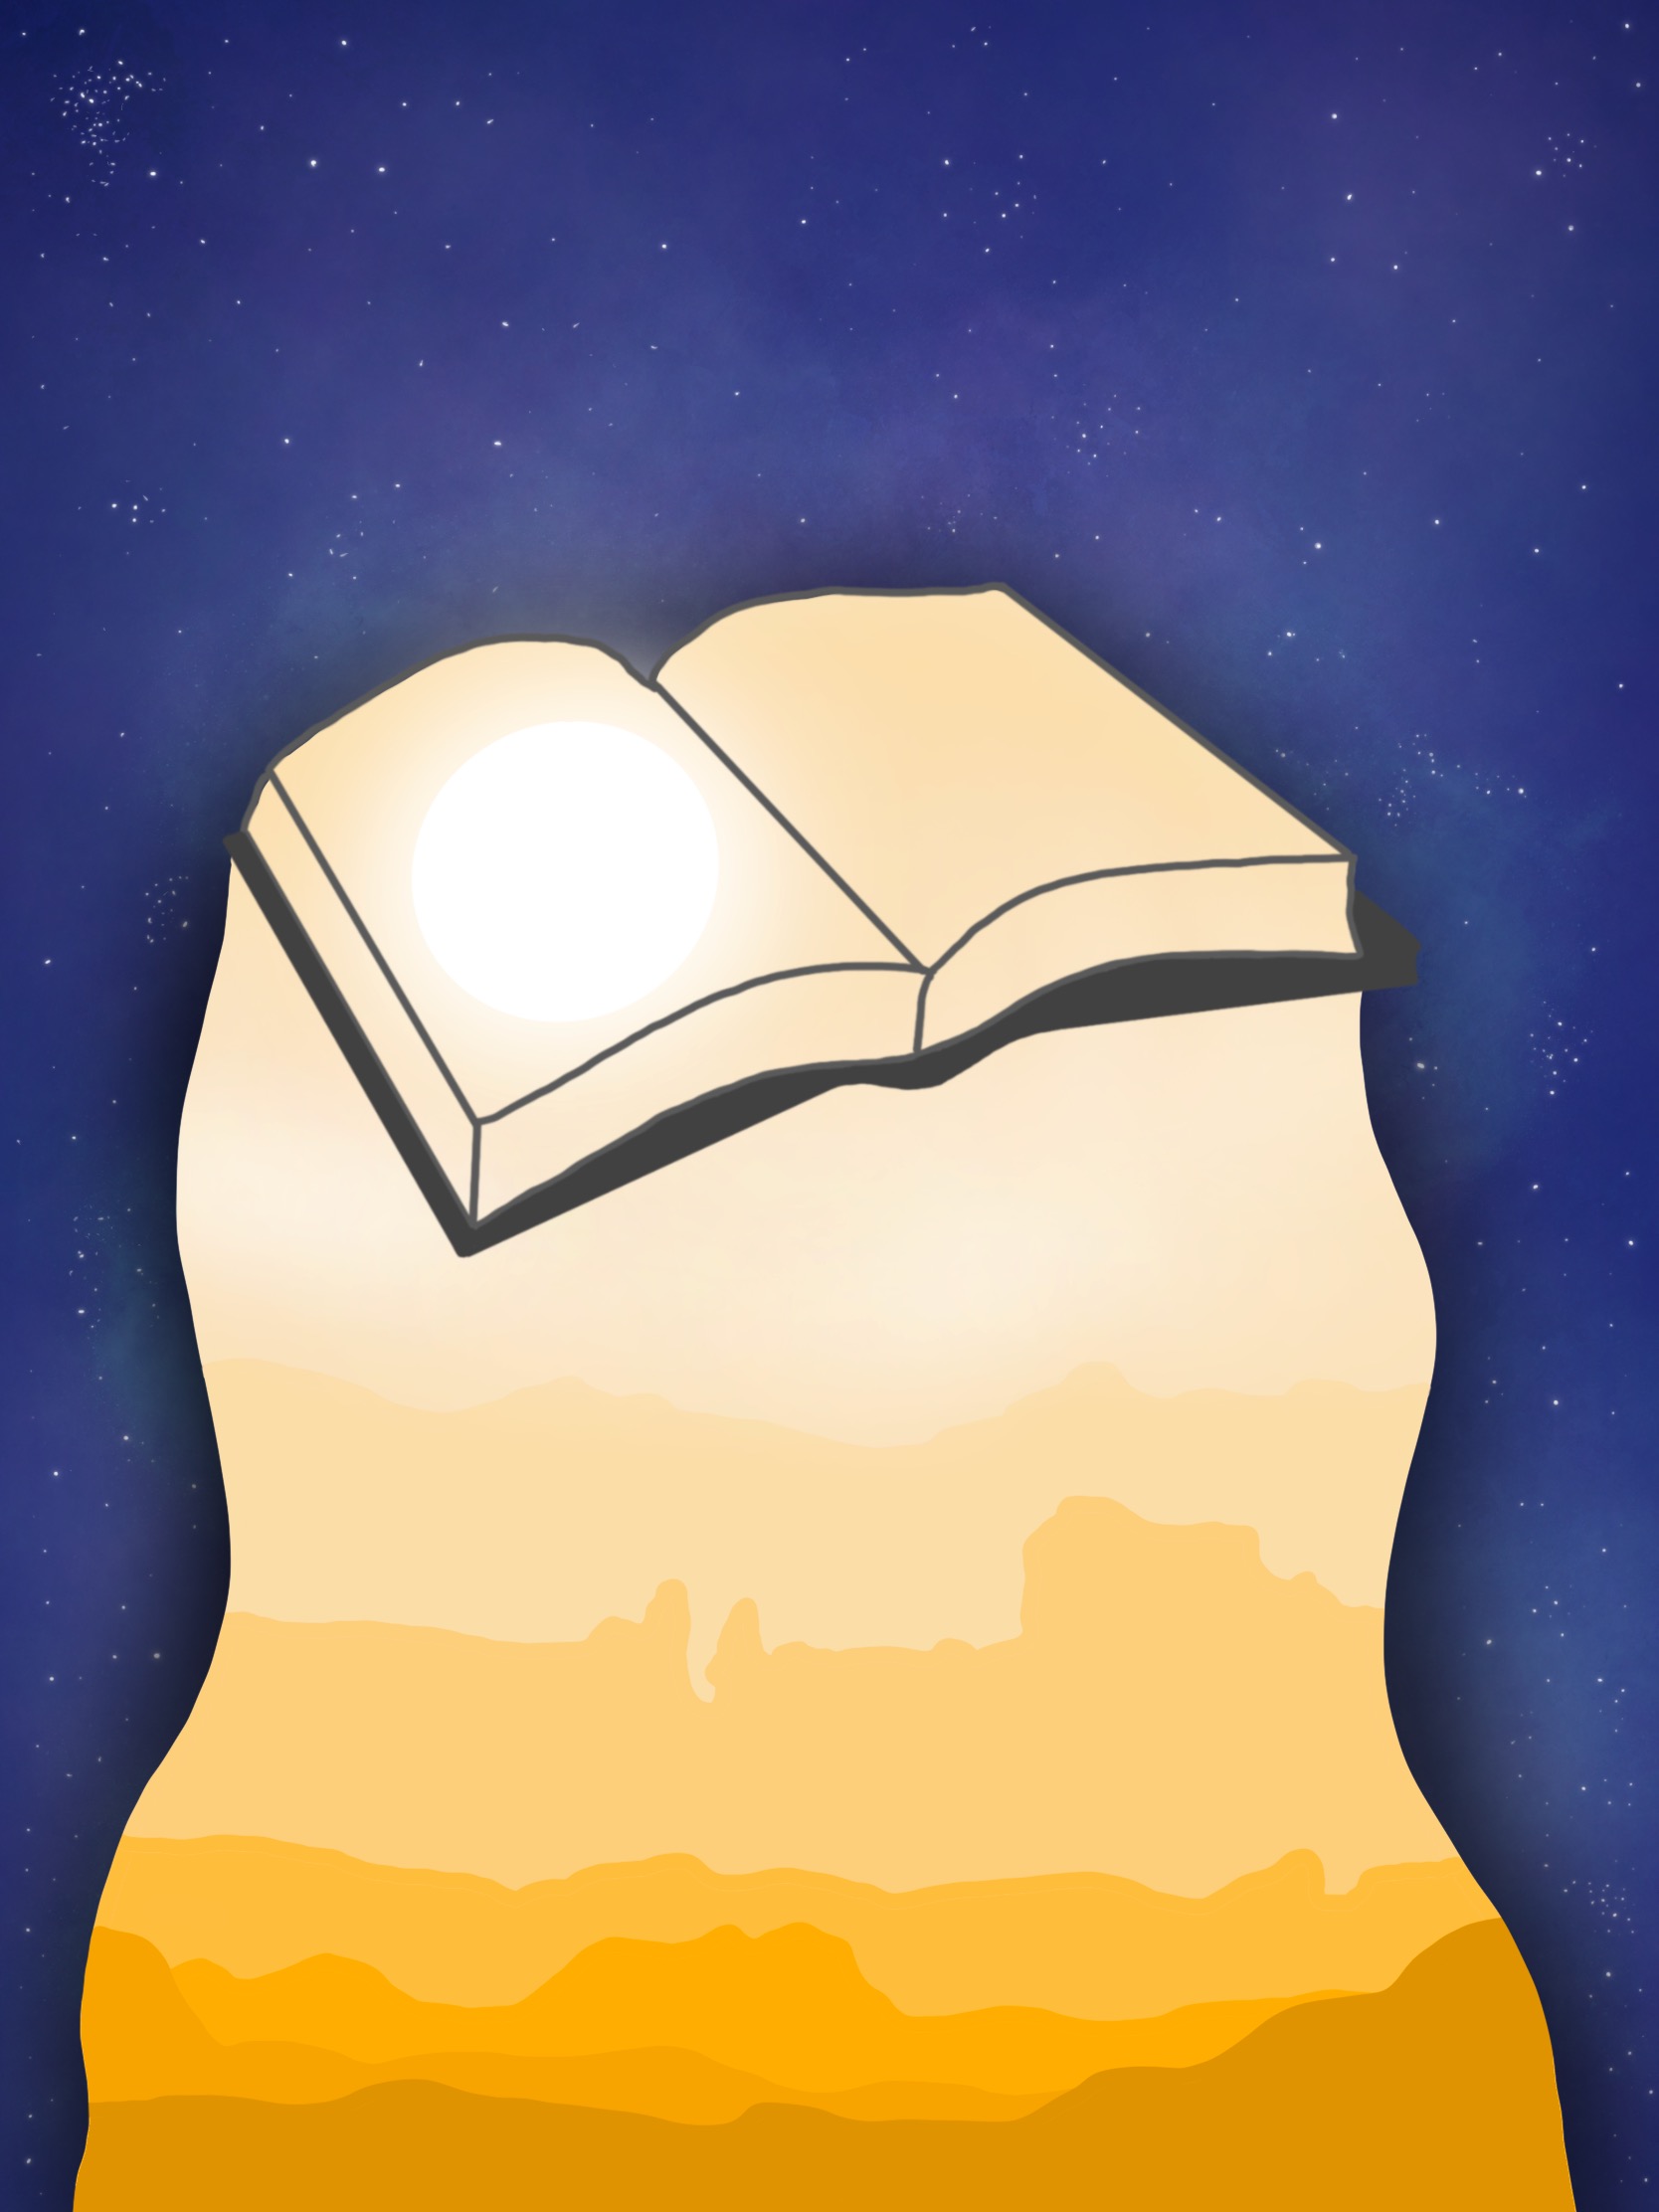 A digital art piece showing a floating book against a dark blue backdrop. The book illuminates a landscape below it, in warm yellow hues.